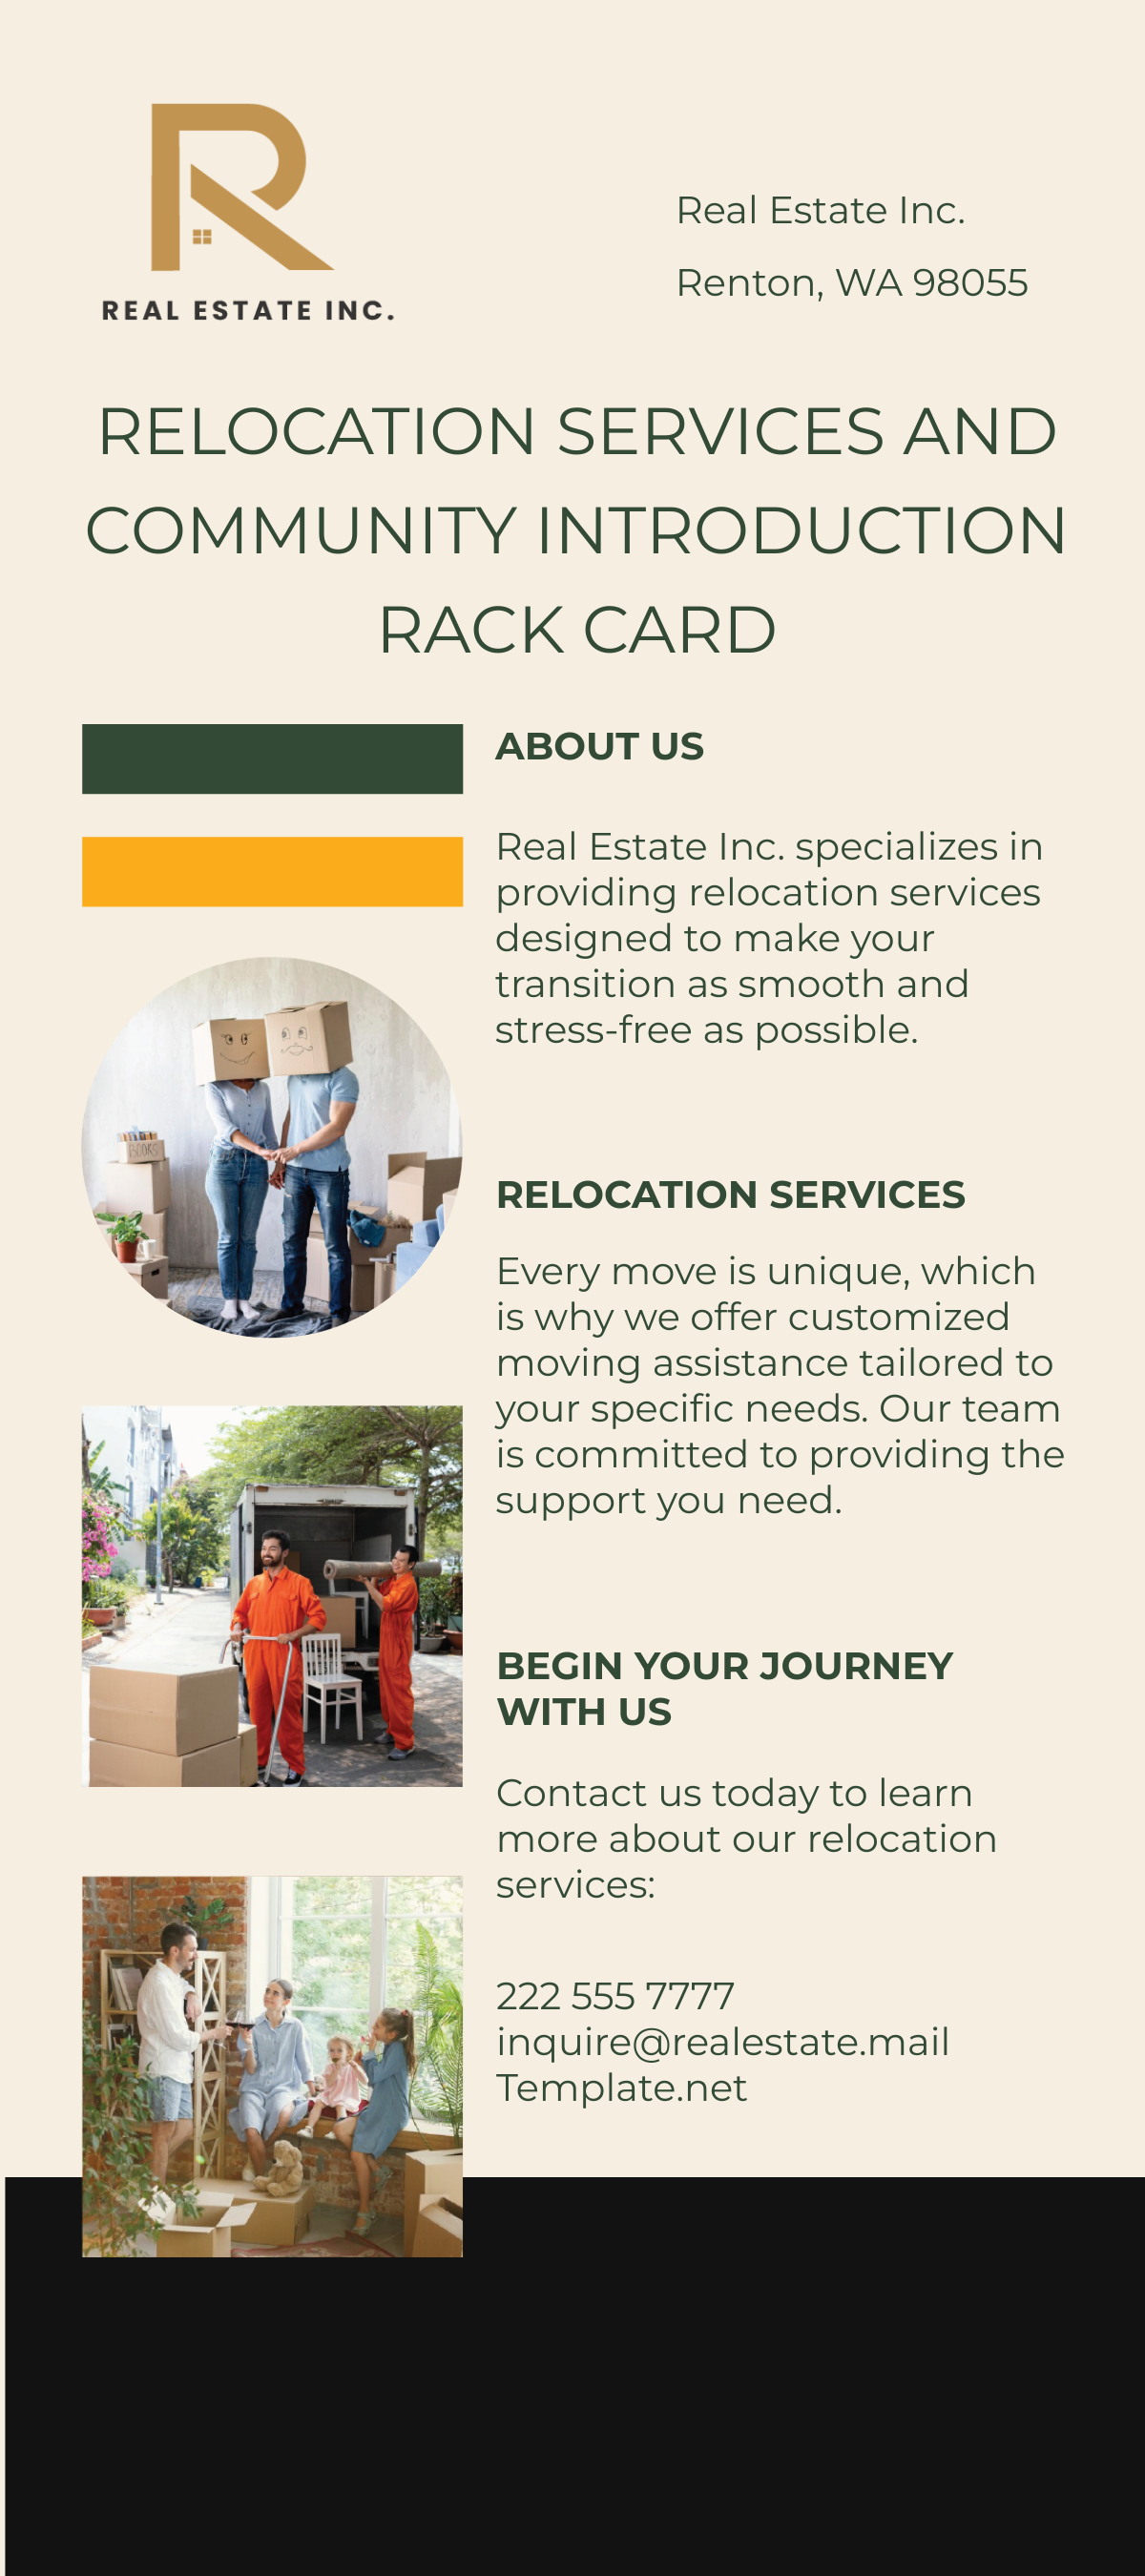 Relocation Services and Community Introduction Rack Card